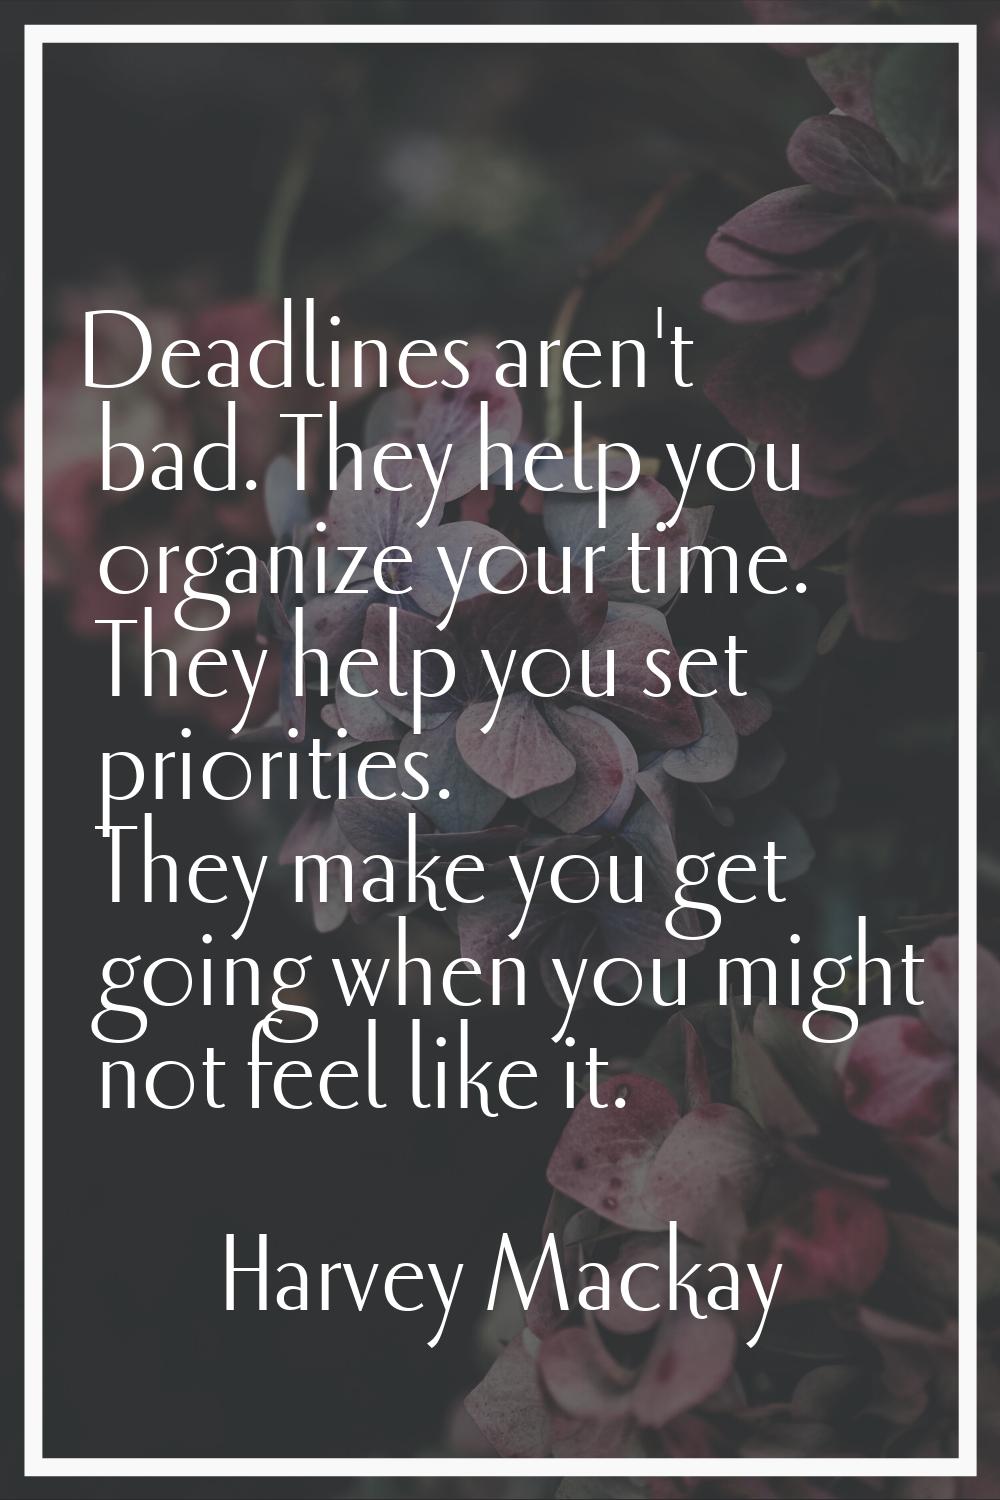 Deadlines aren't bad. They help you organize your time. They help you set priorities. They make you